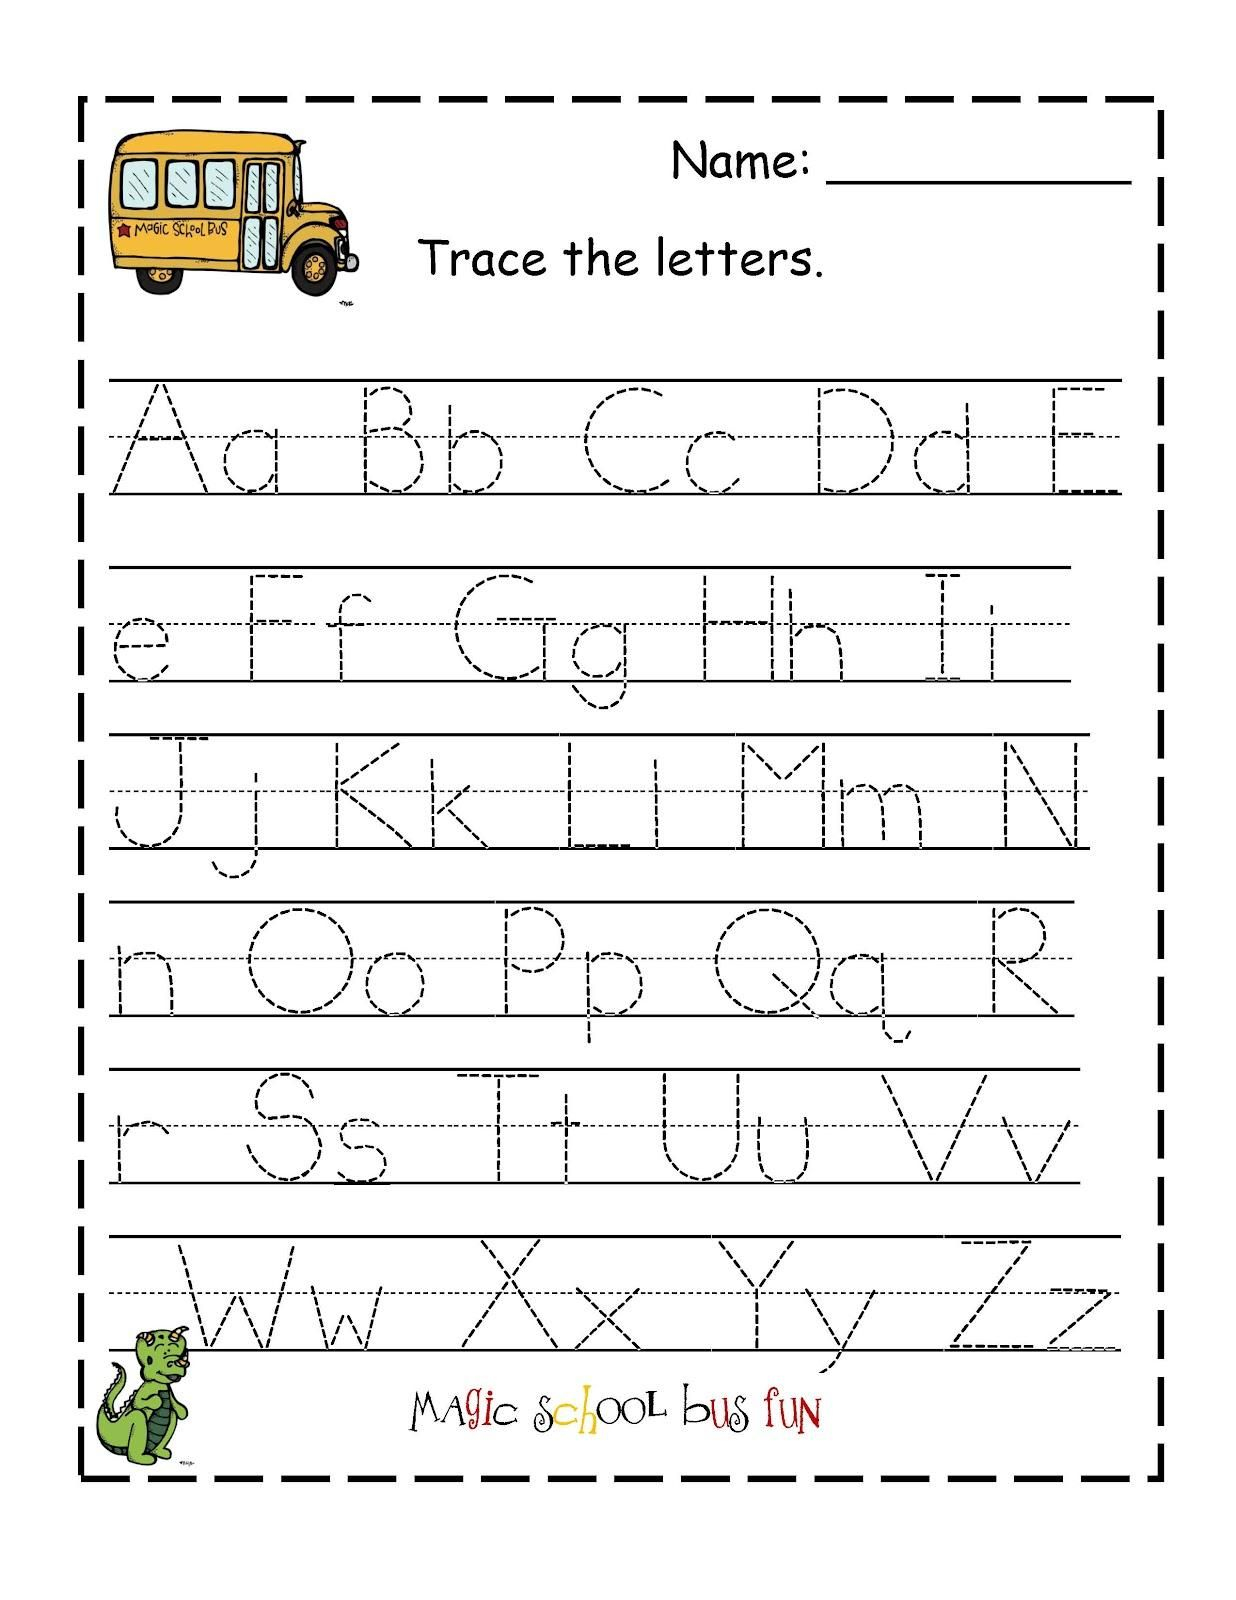 Free Printable Abc Tracing Worksheets #2 | Handwriting regarding Letter Tracing Download Free